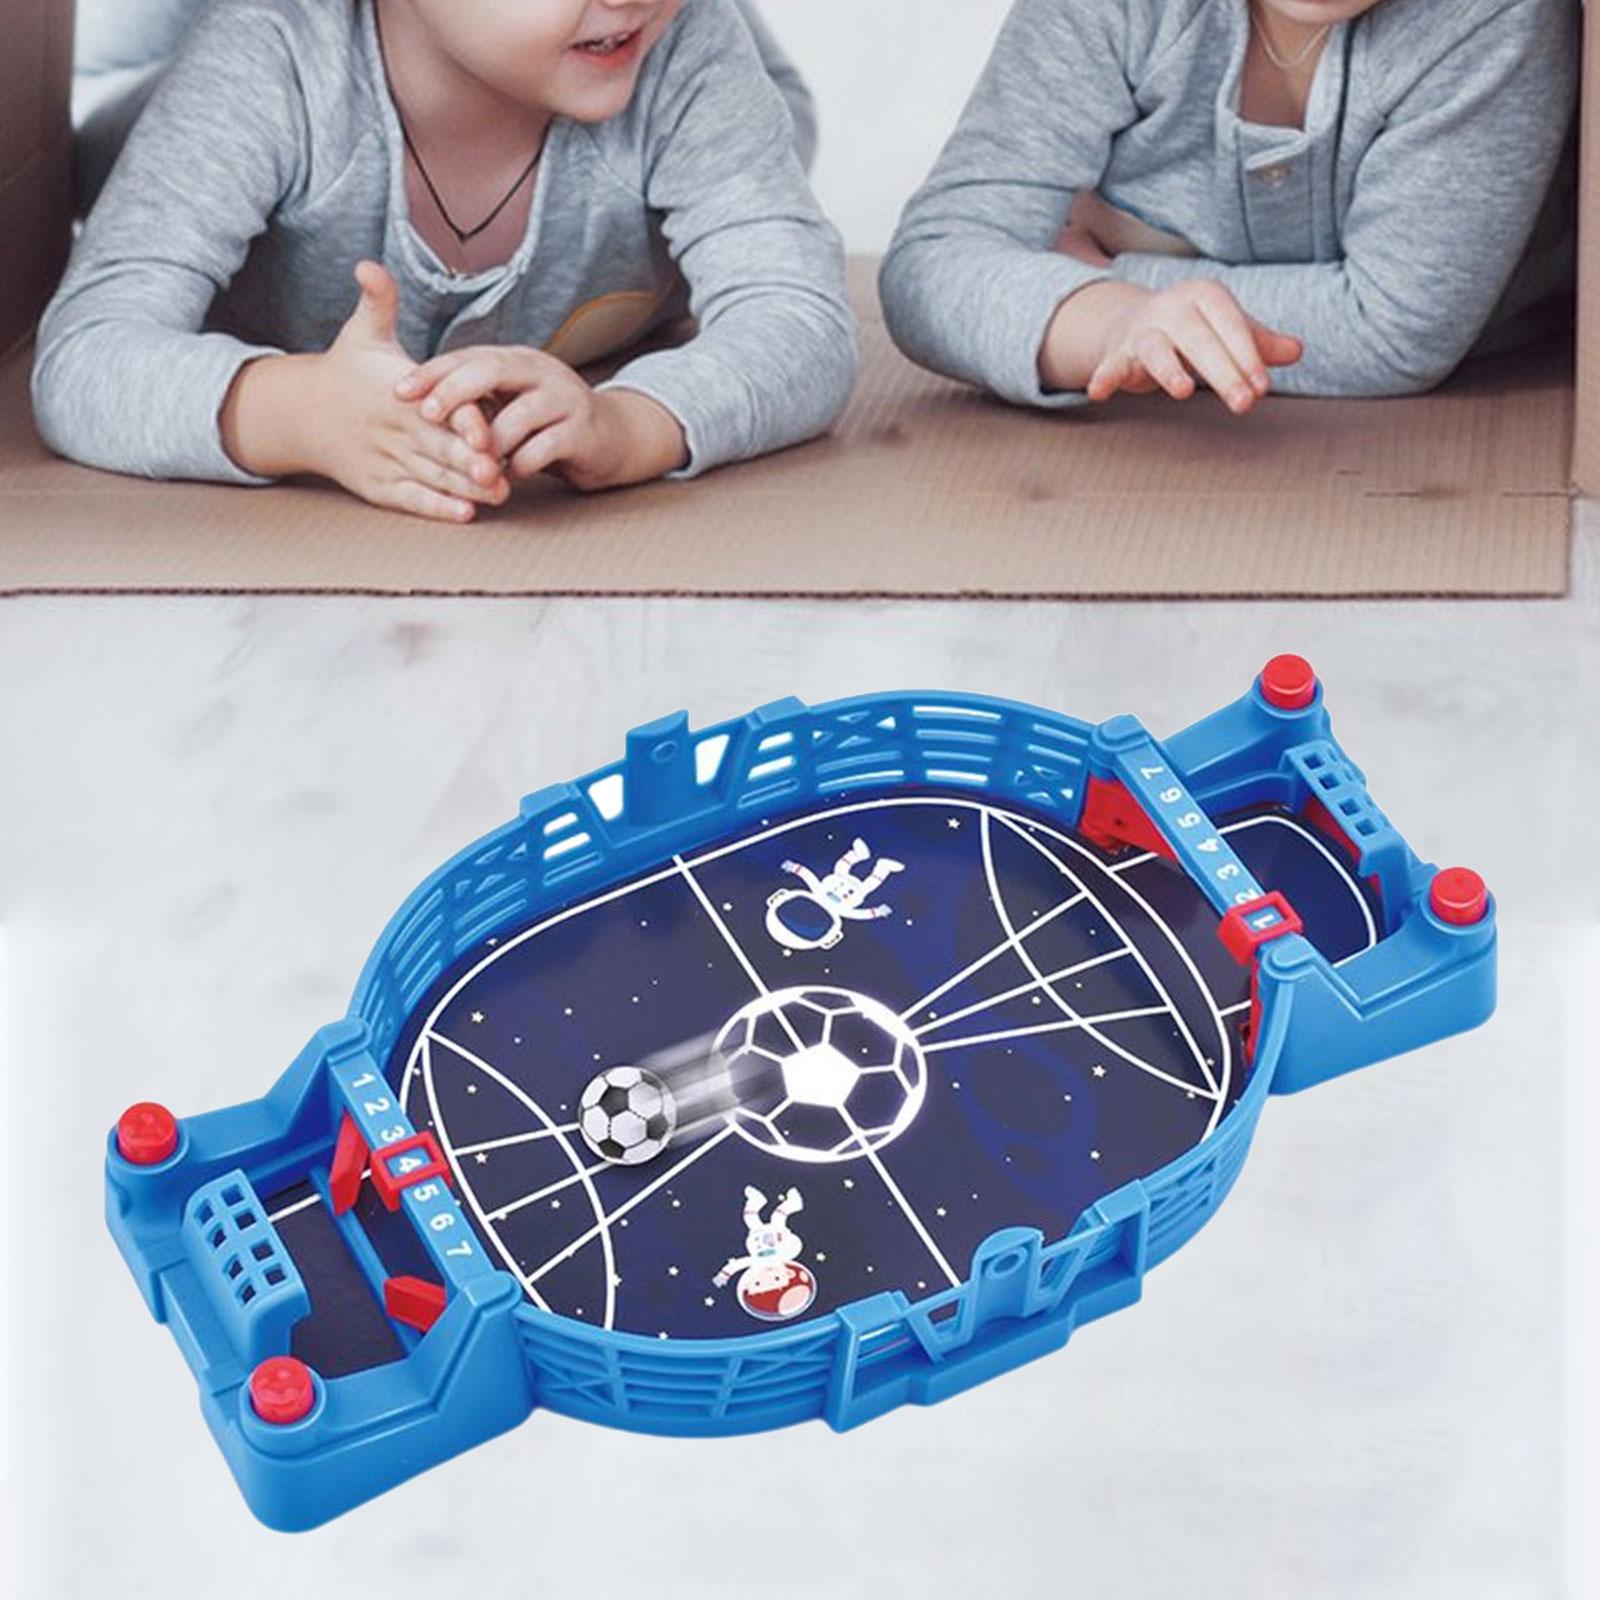 Interactive Tabletop Football Games Interactive Toy Sports Boys Blue